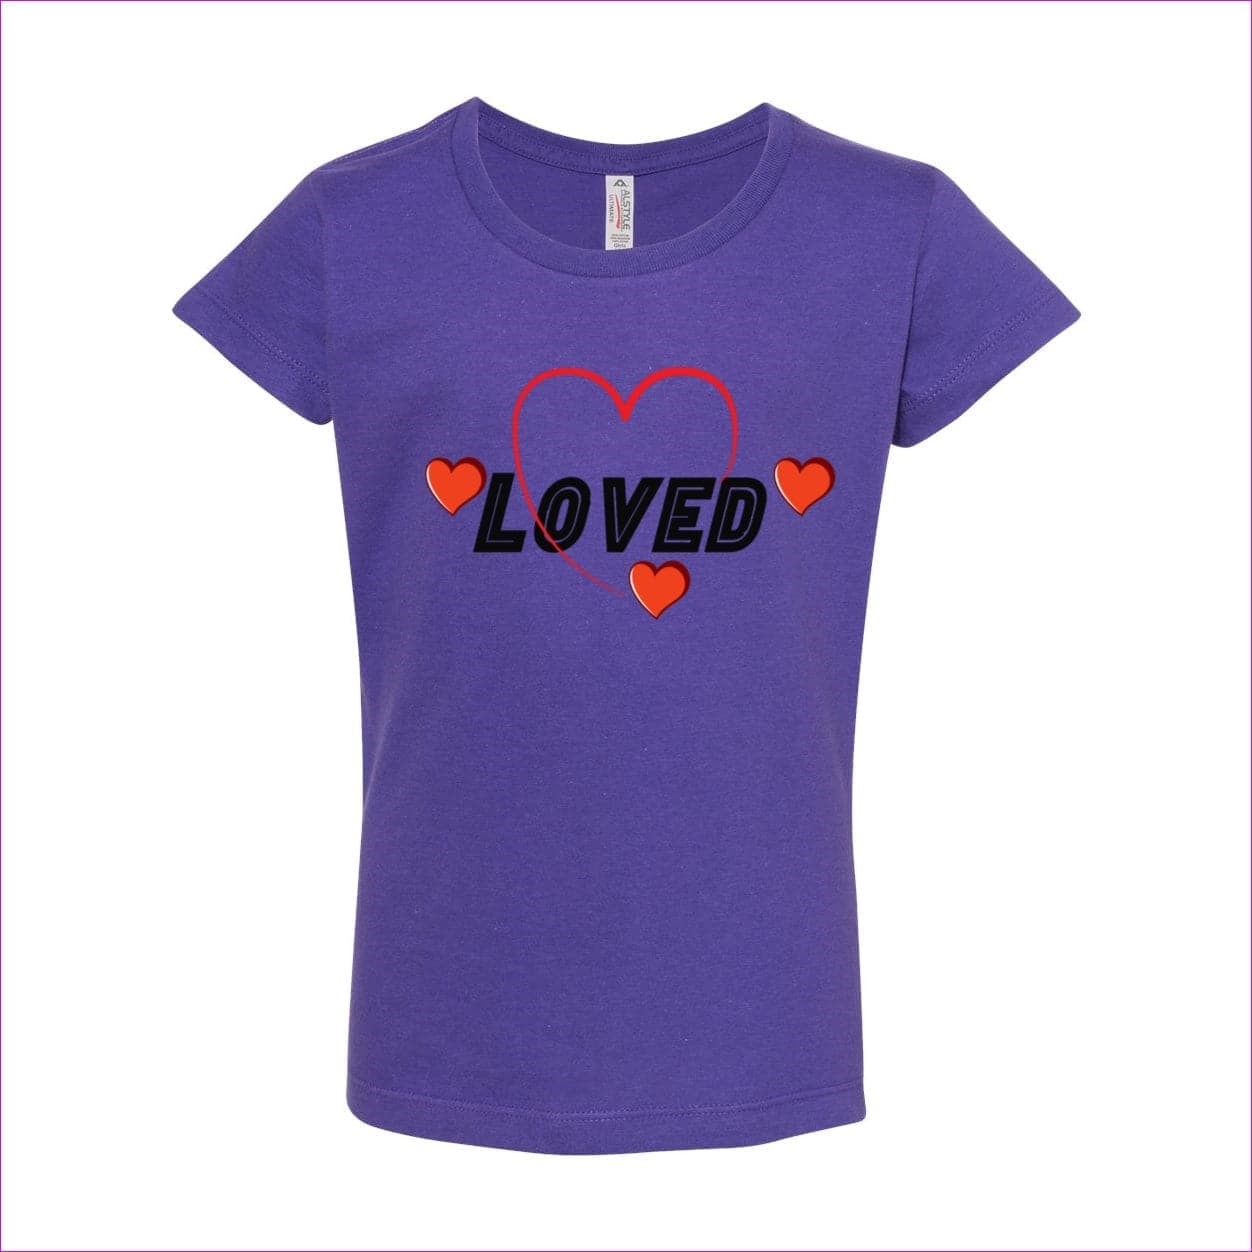 Purple - Loved Girls’ Ultimate T-Shirt - kids t-shirts at TFC&H Co.